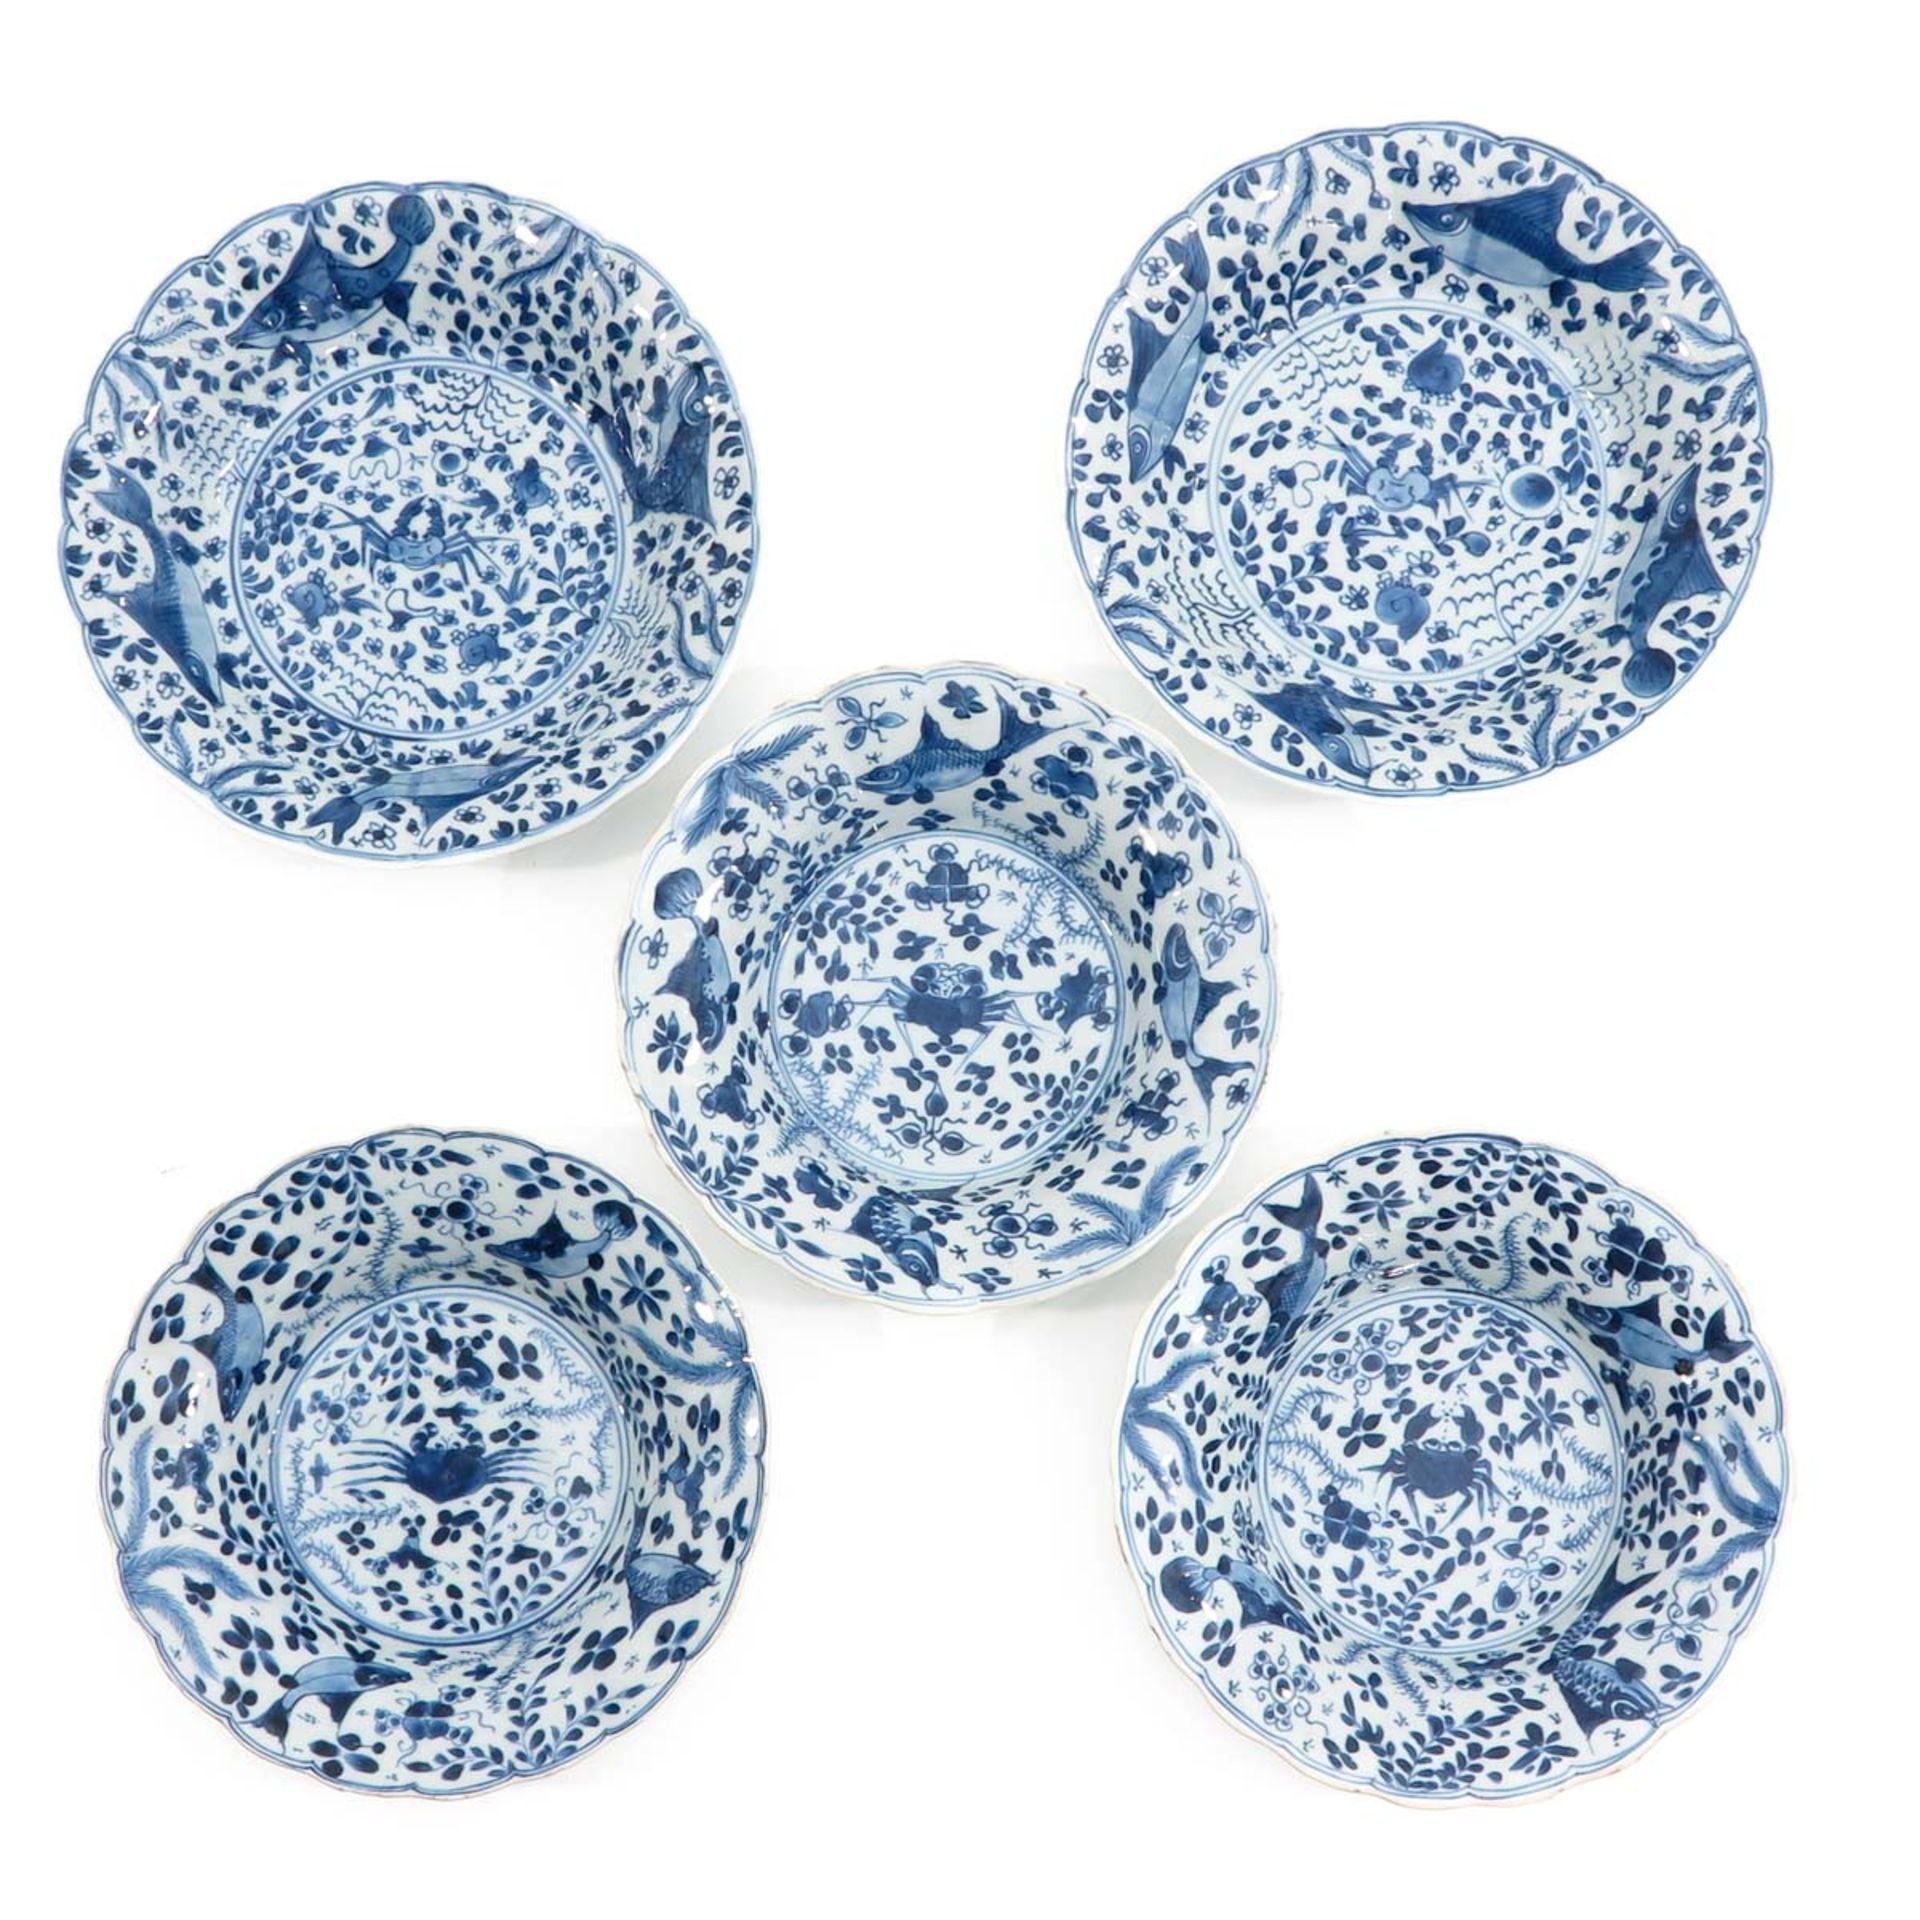 A Collection of 5 Blue and White Plates